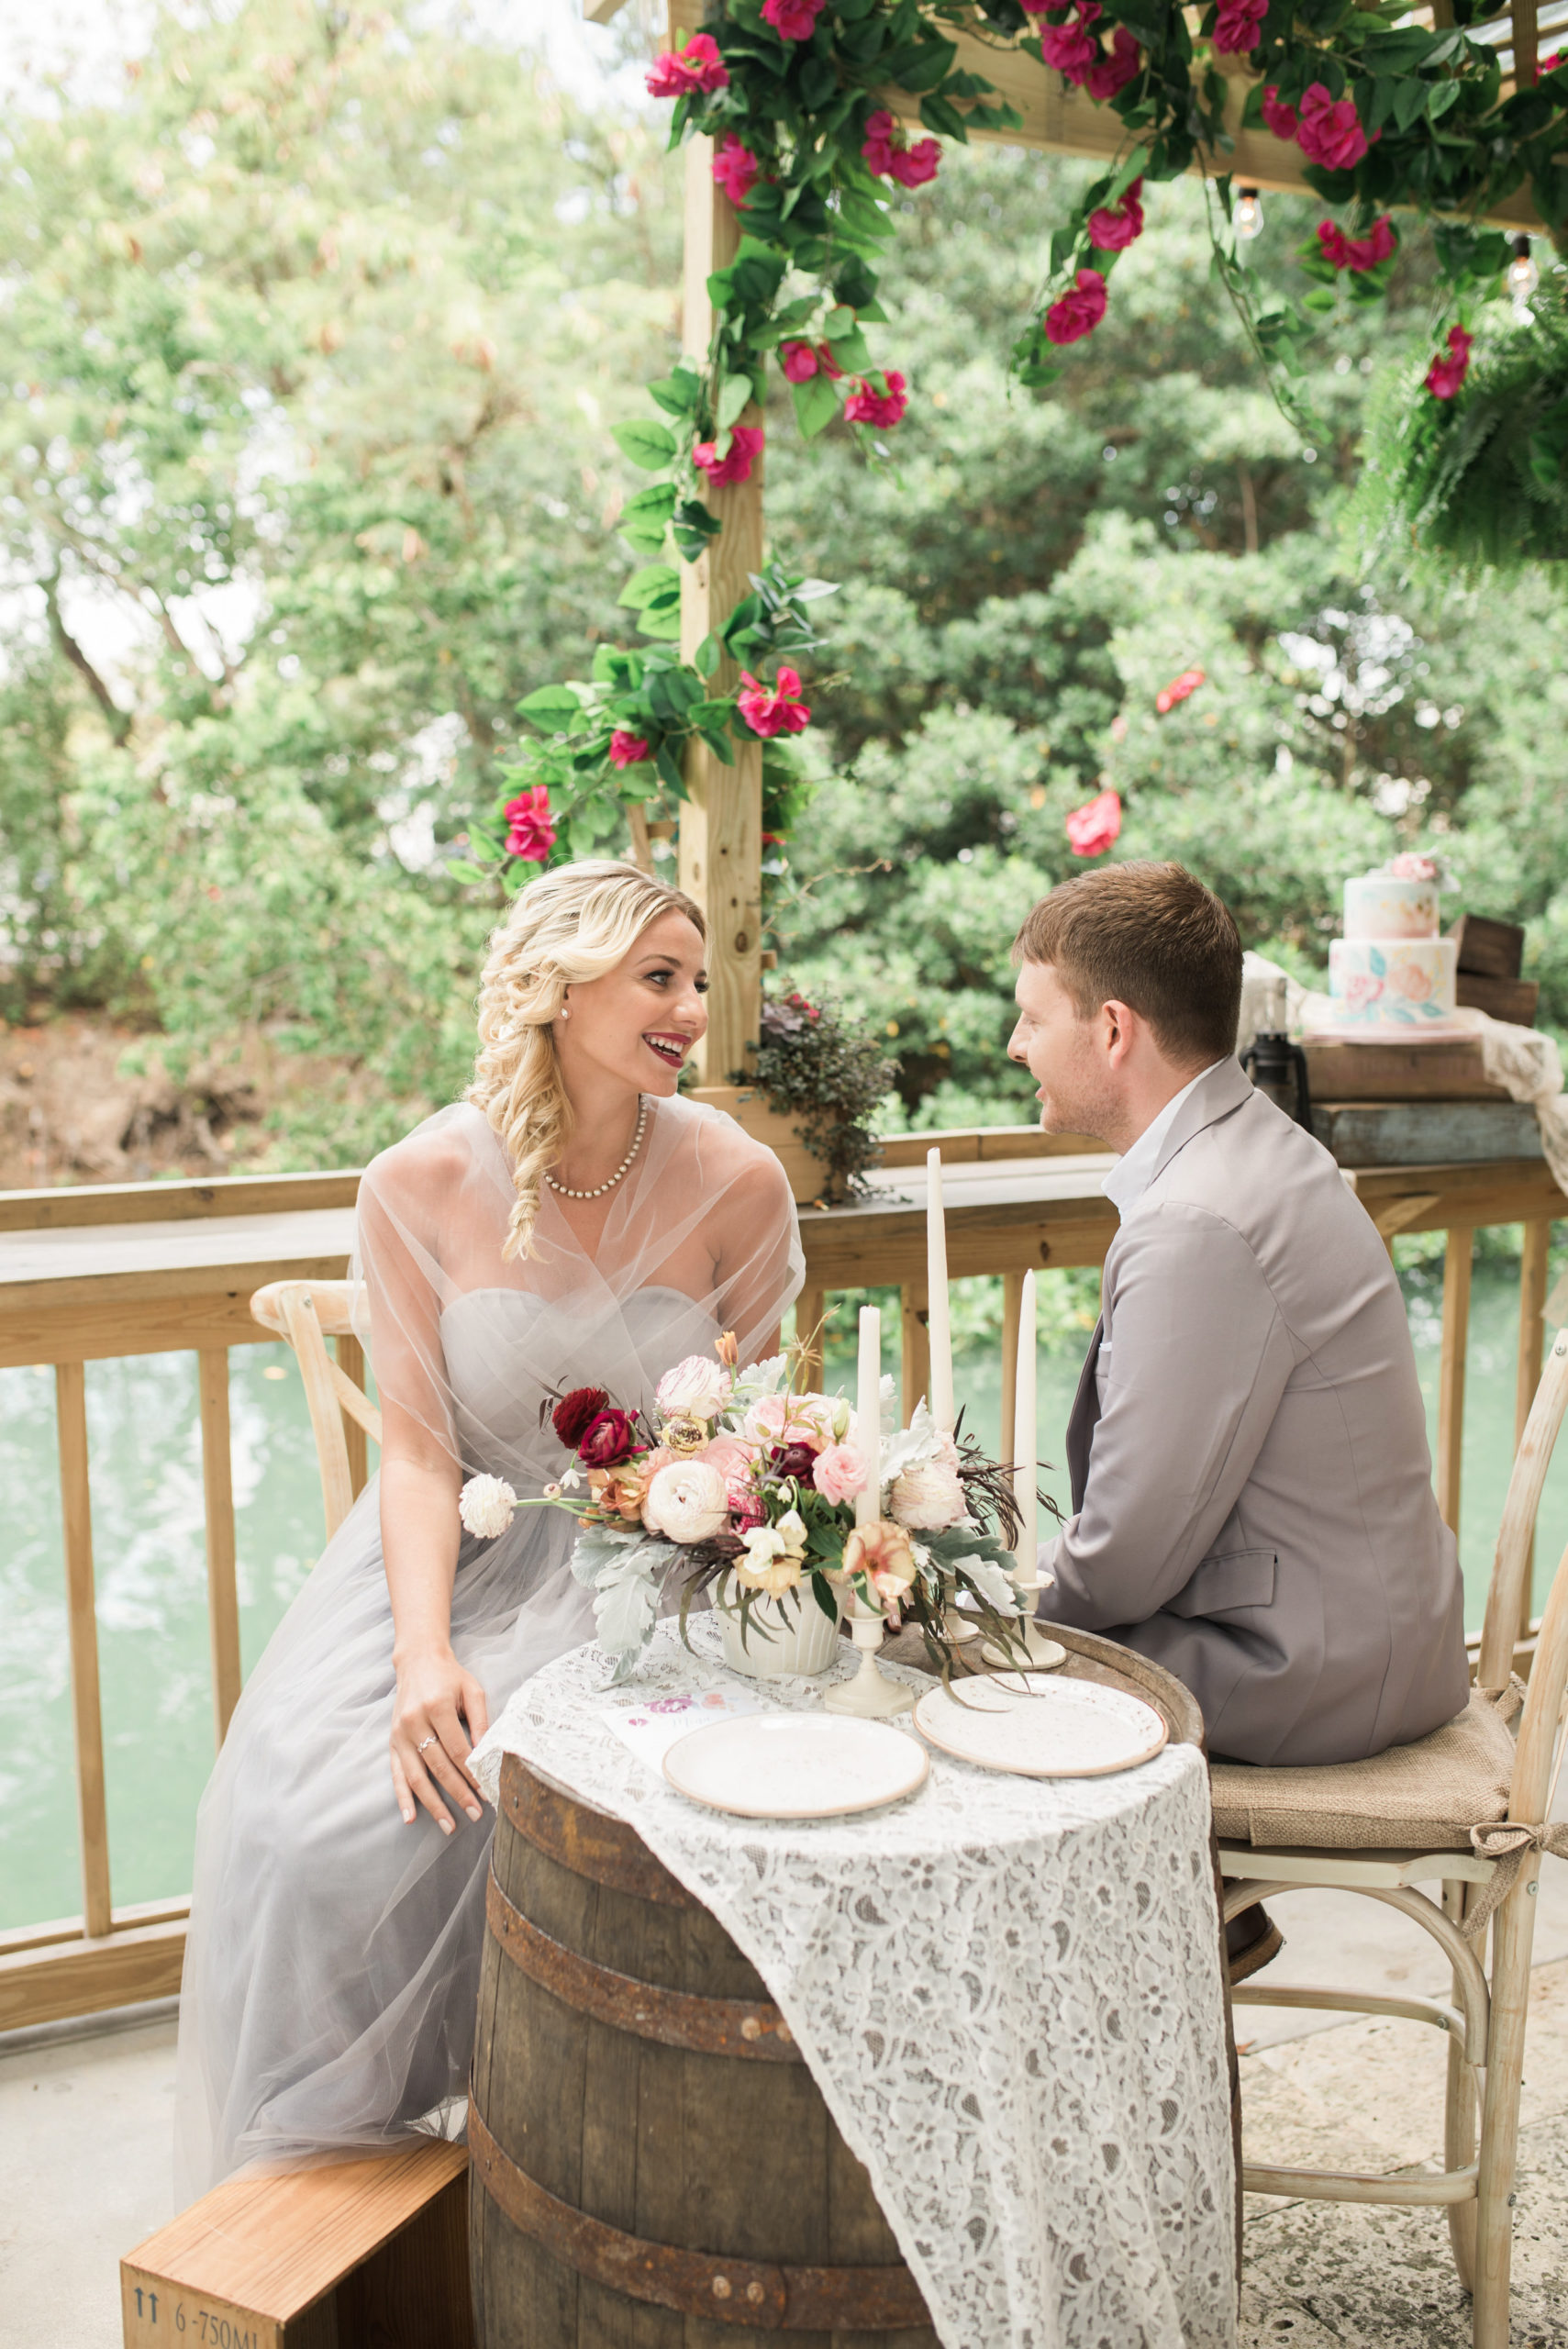 y and the Tramp wedding seating featured wooden barrels and boxes, softened by lace and florals